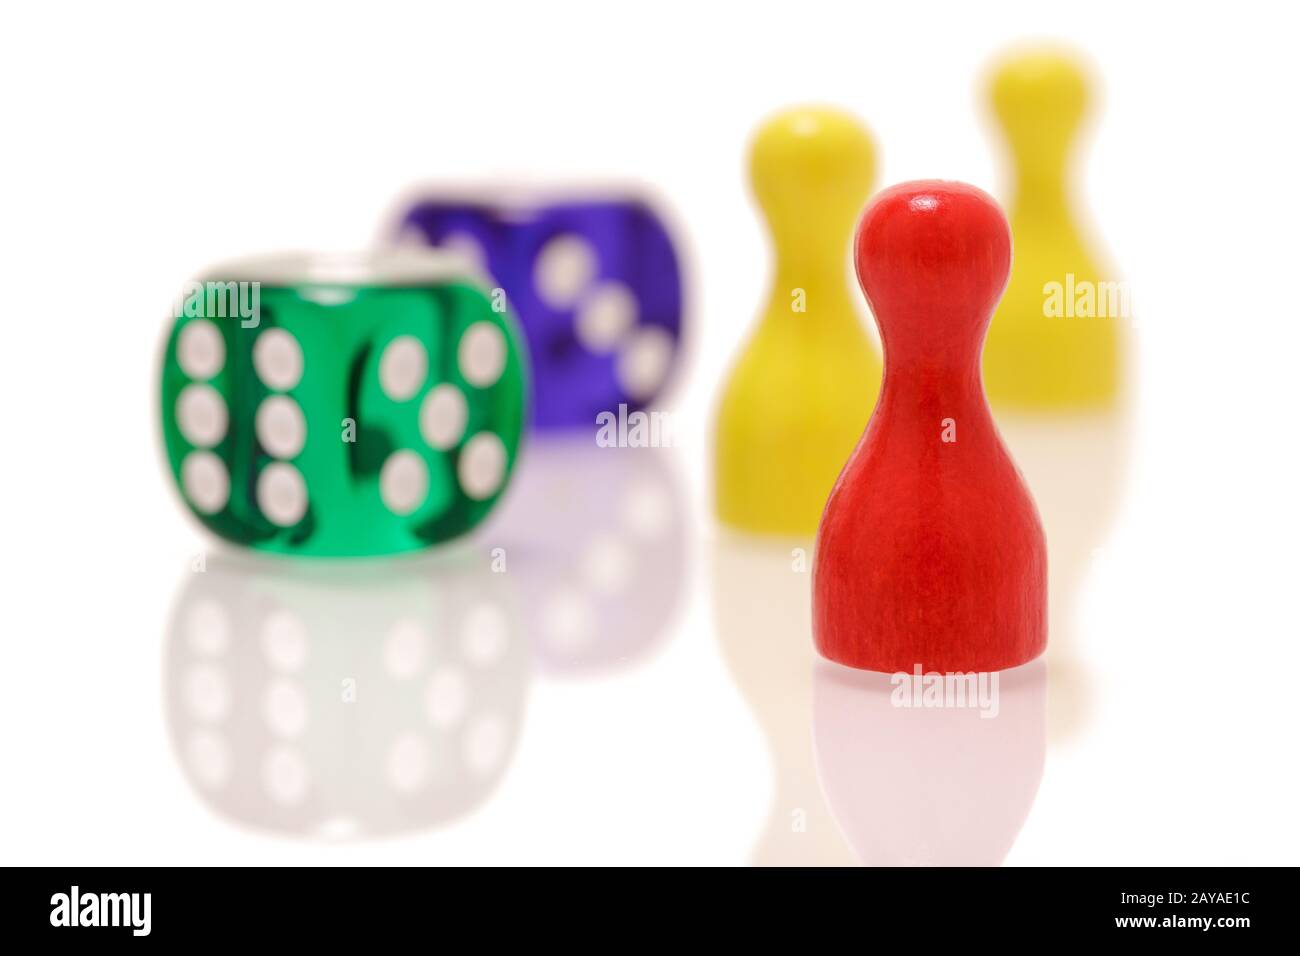 Gambling dices and wooden figures isolated on white background. Games, entertainment and luck concept. Stock Photo